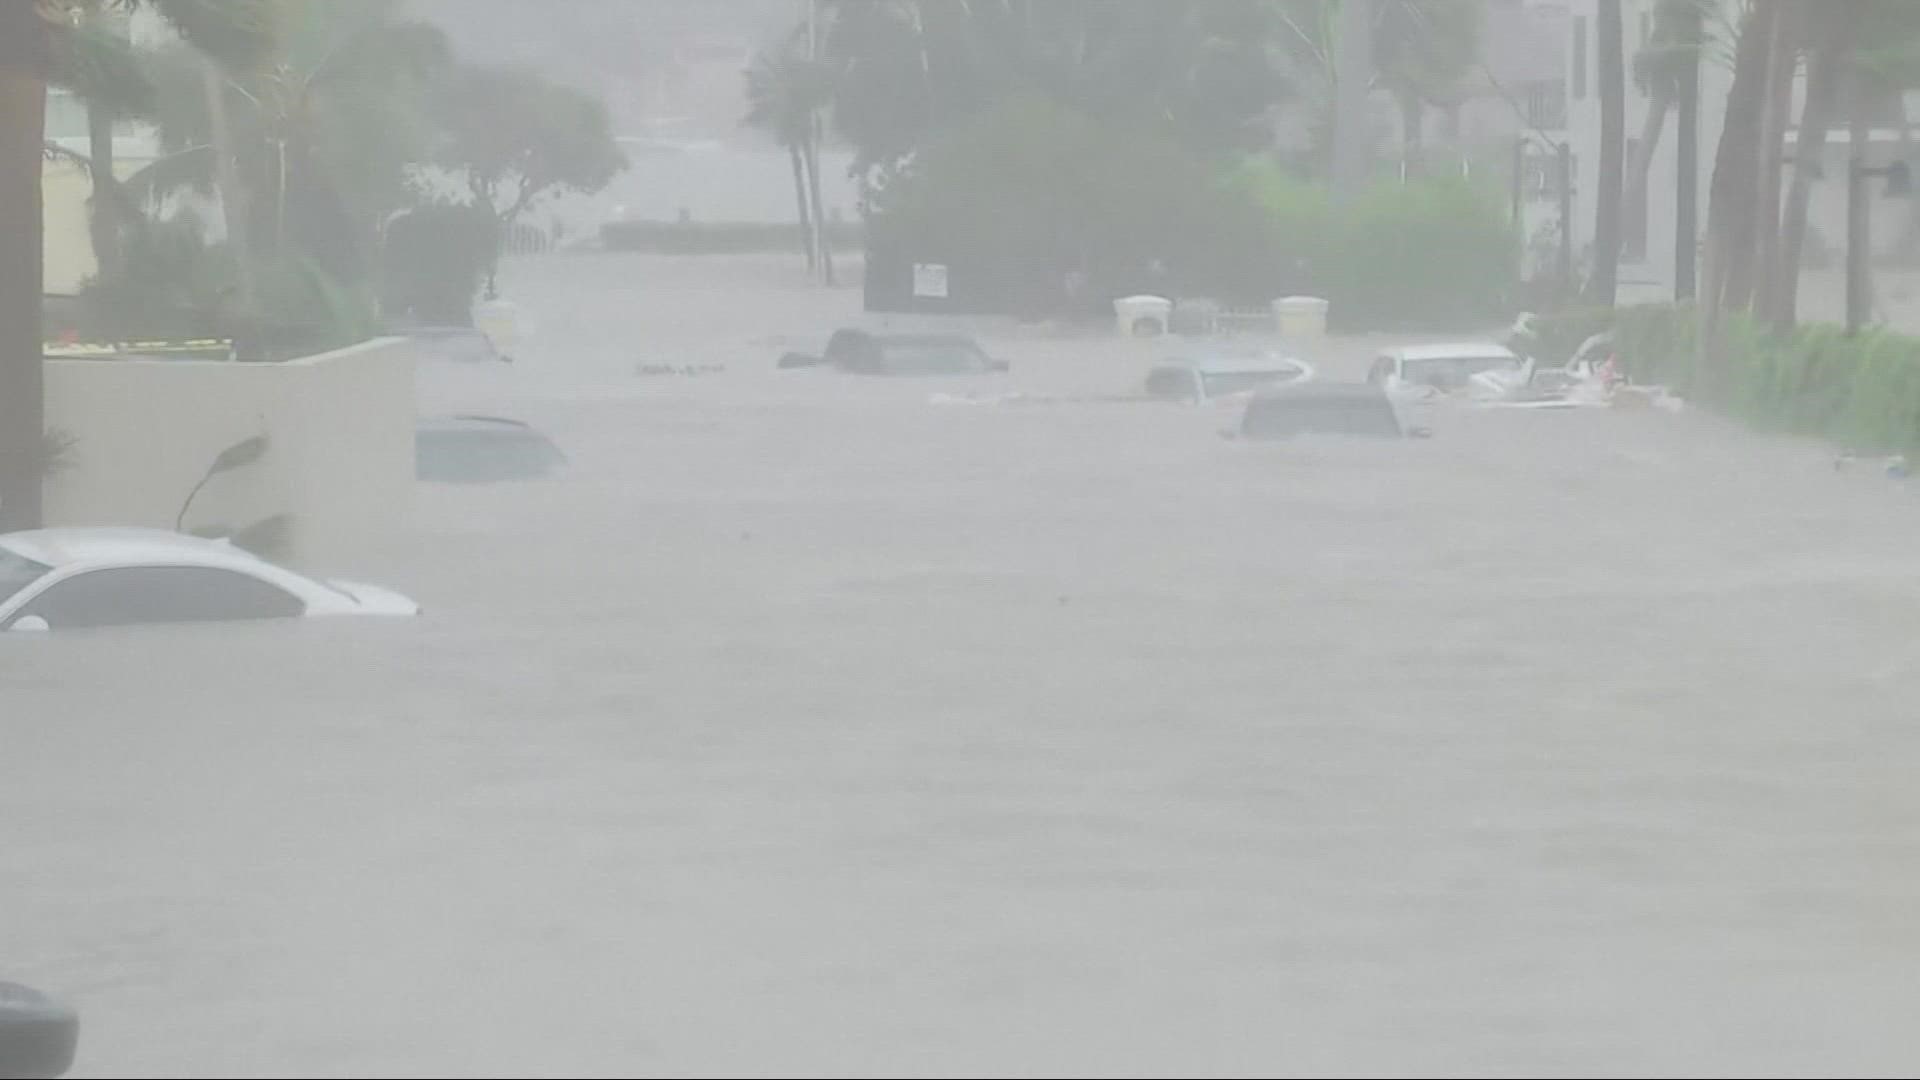 One of the most powerful storms to hit the U.S. swept through parts of Florida's heavily-populated Gulf coast Wednesday, causing widespread damage.